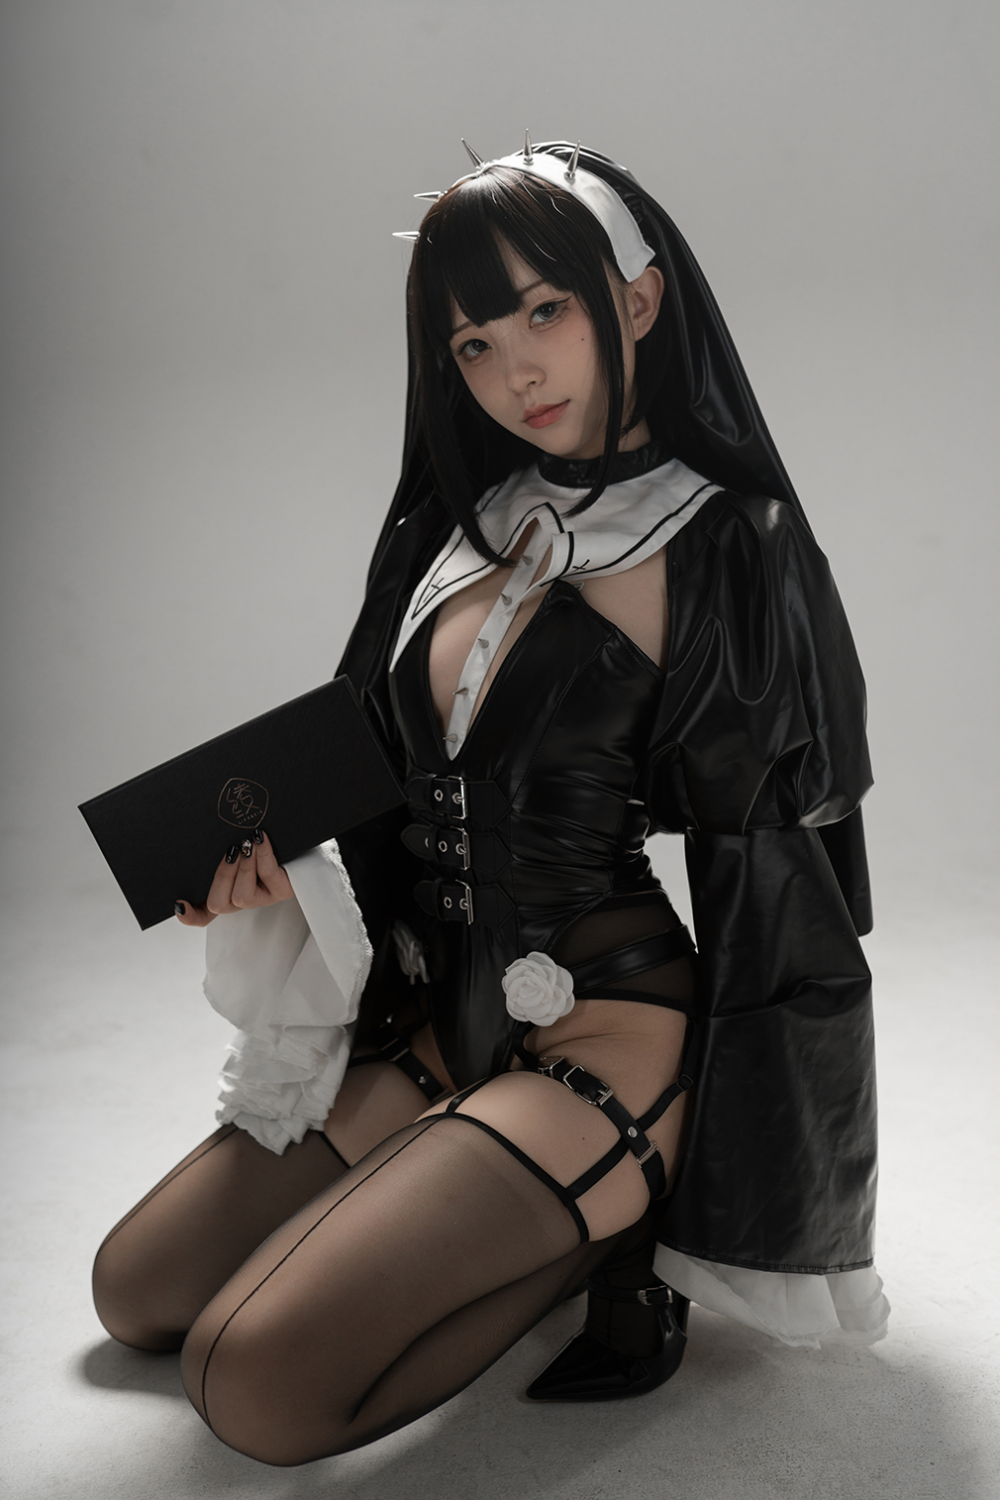 Girl Costume Porn - Cosplay Anime Asian Girl with Hot Lingerie - Porn - EroMe